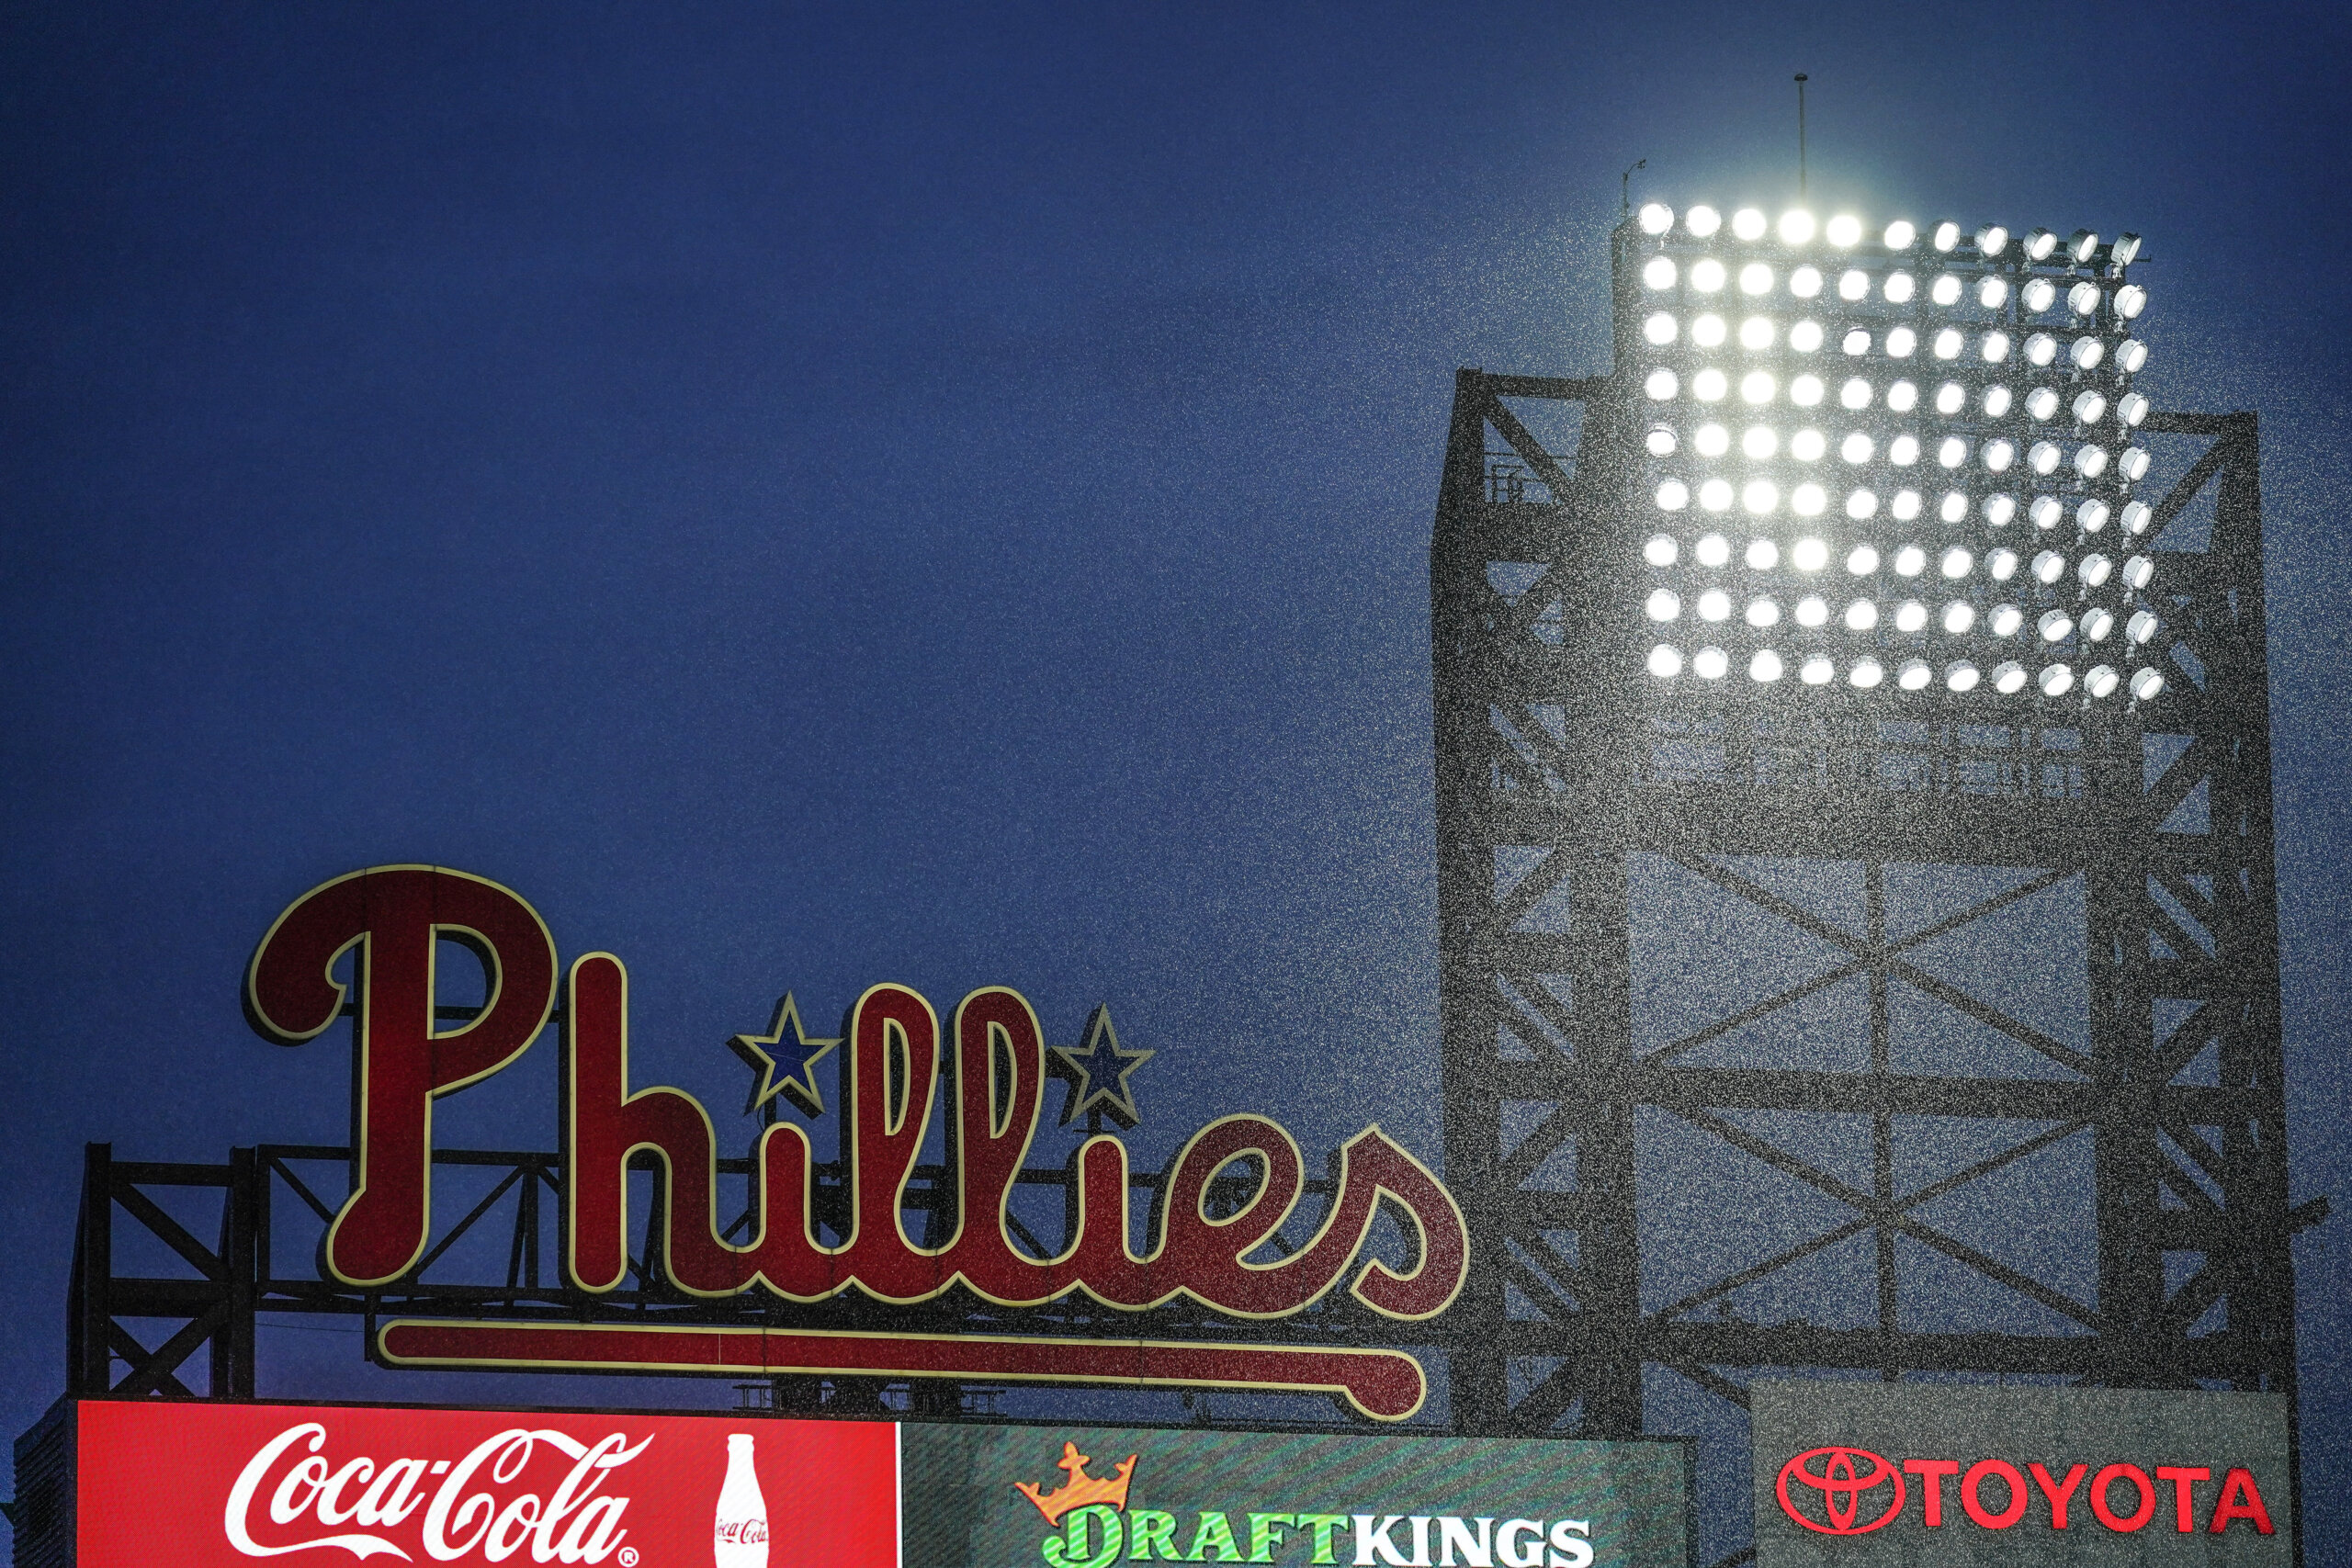 Nationals and Phillies are rained out and the game is rescheduled